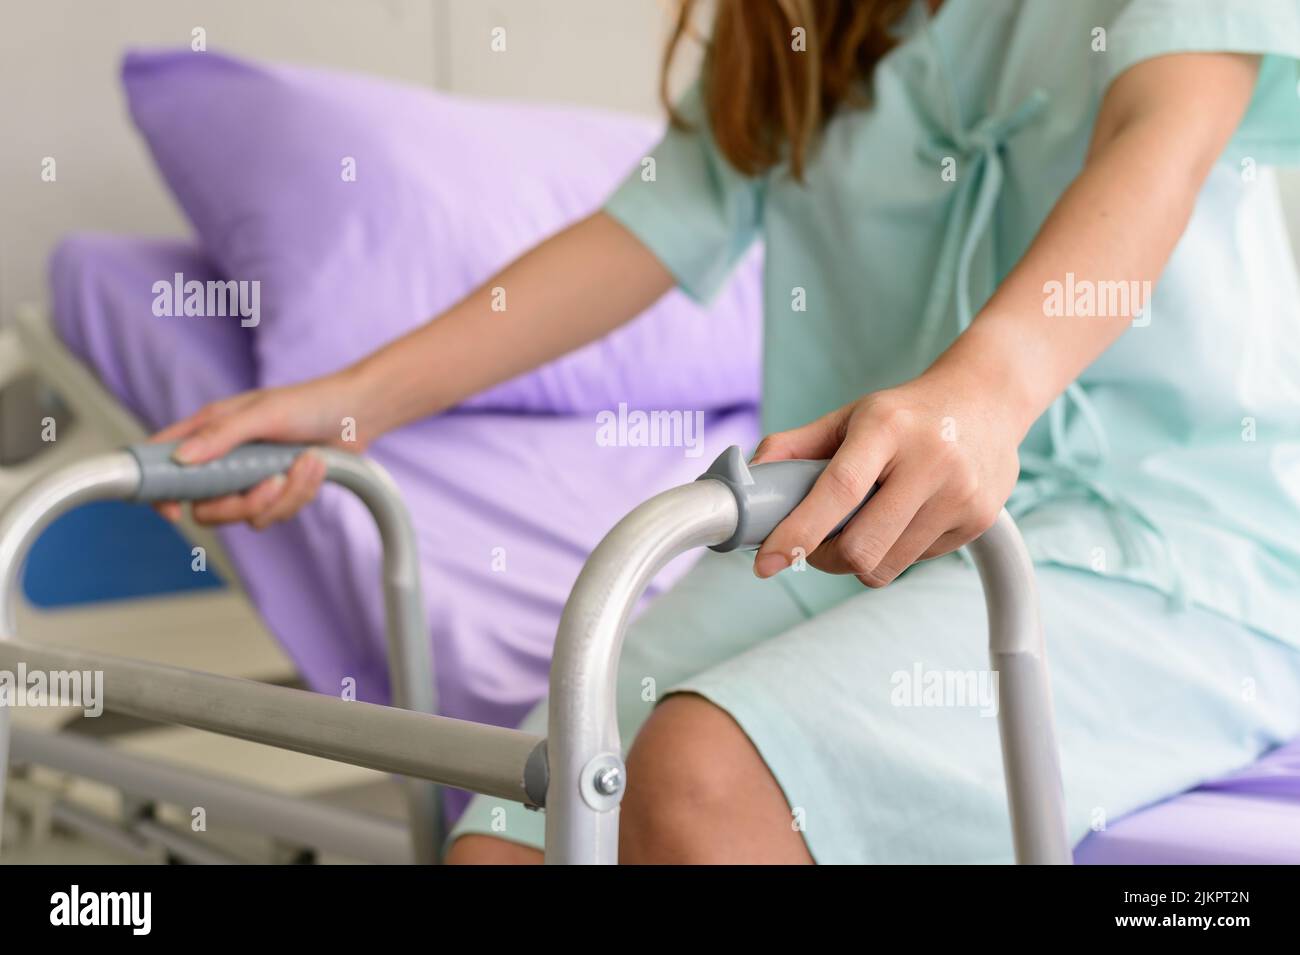 Hospital patient with a walking frame Stock Photo